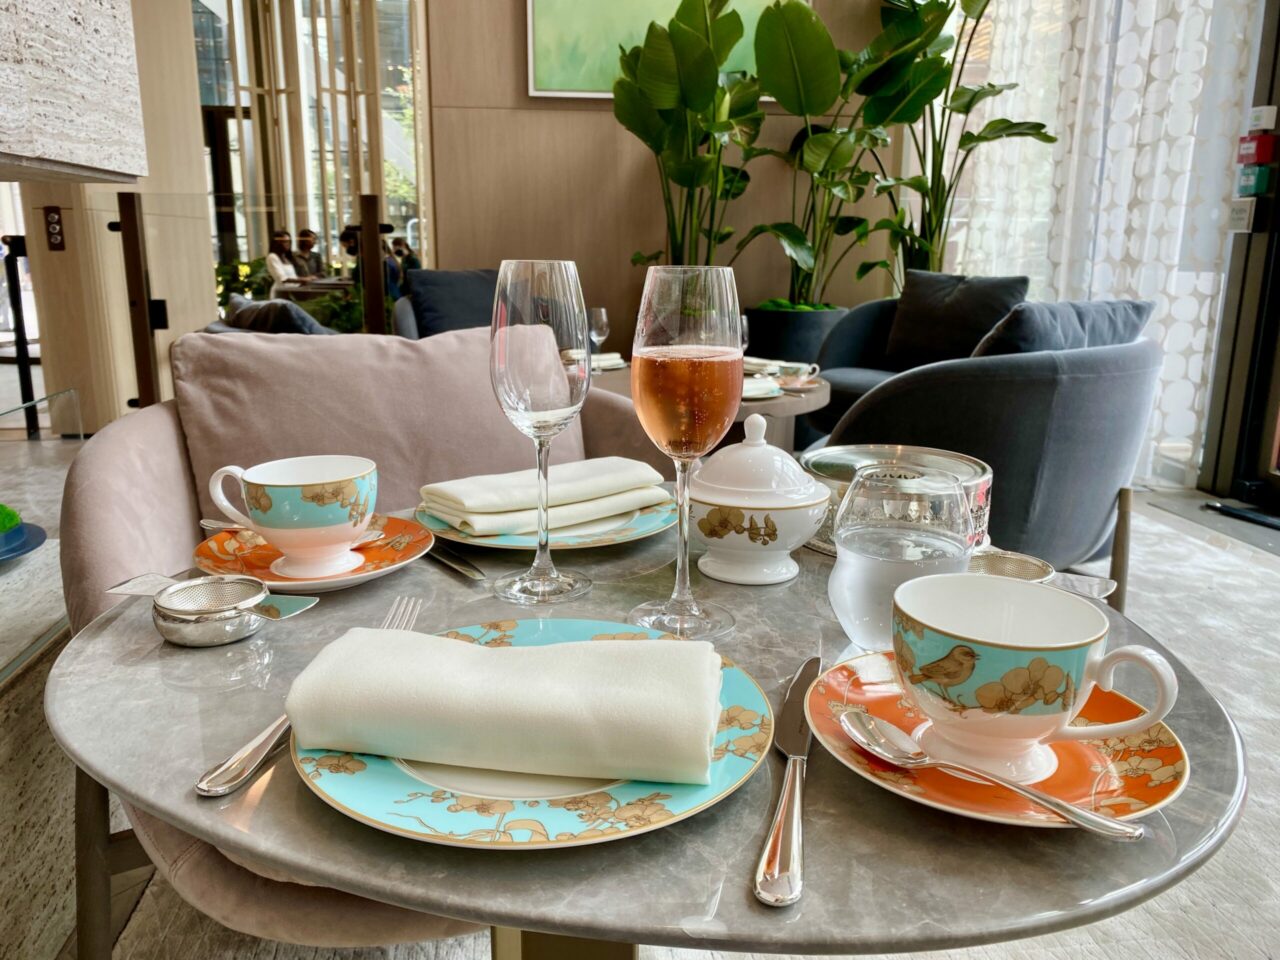 Afternoon tea by Cherish Finden at The Orchid Lounge